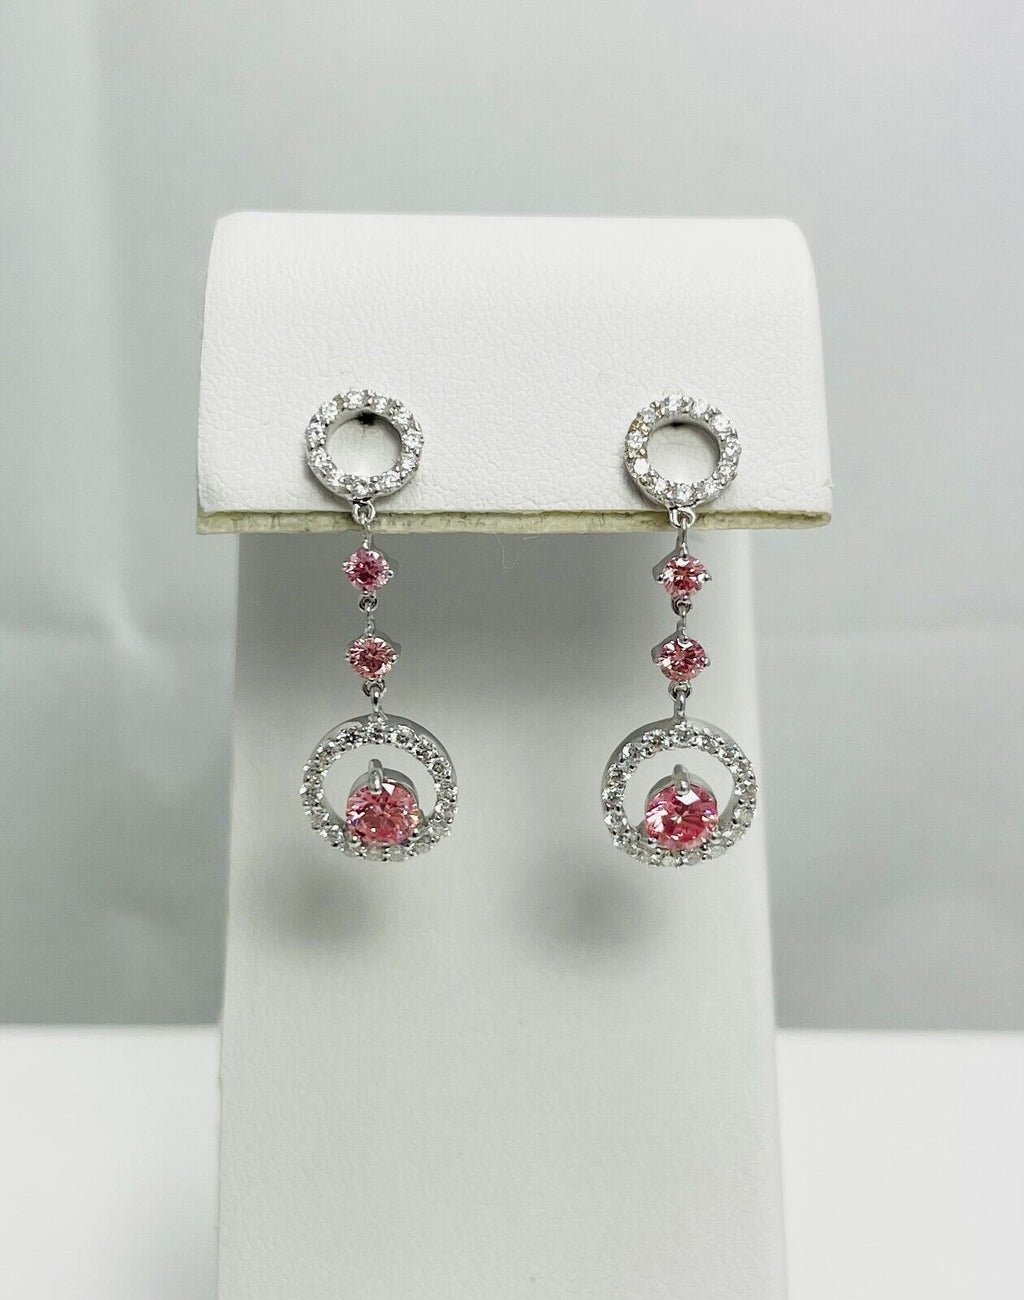 New! 1ctw Pink & White LAB Grown Chatham Diamond 14k Gold Dangle Earrings